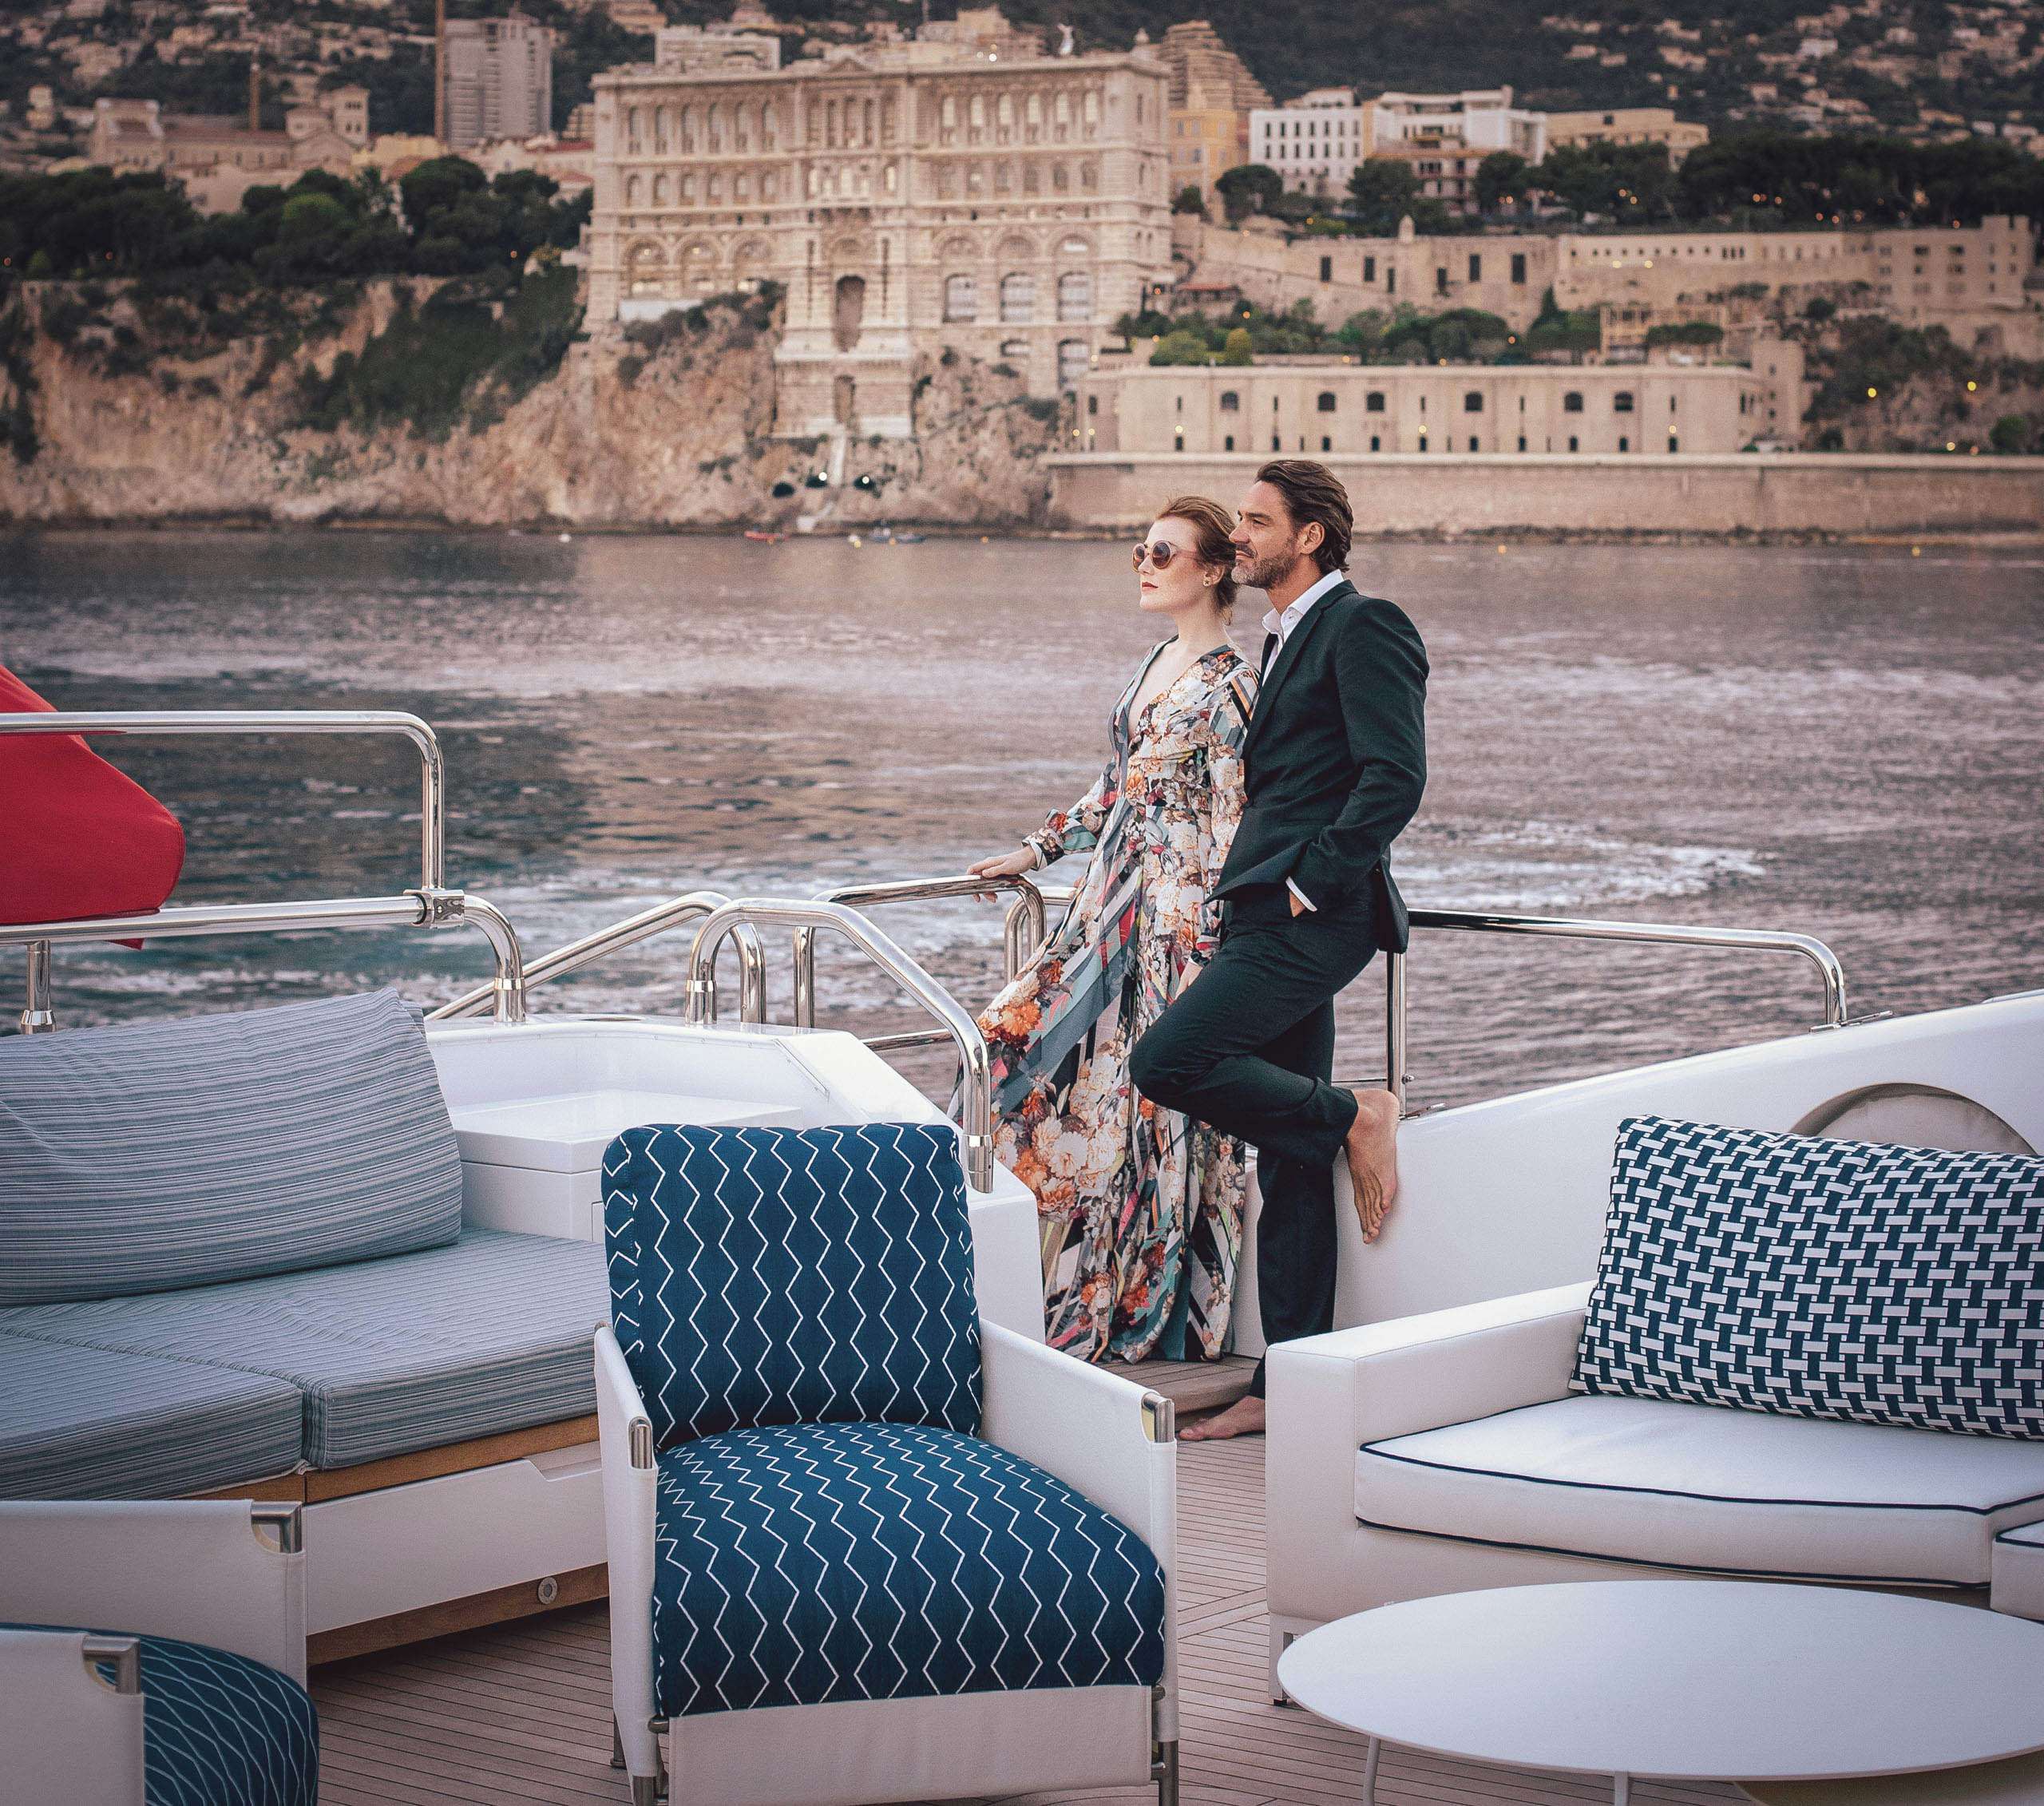 An elegant couple leans affectionately against the railing of a luxurious yacht, gazing out at the riviera coastline during the Cannes Film Festival.